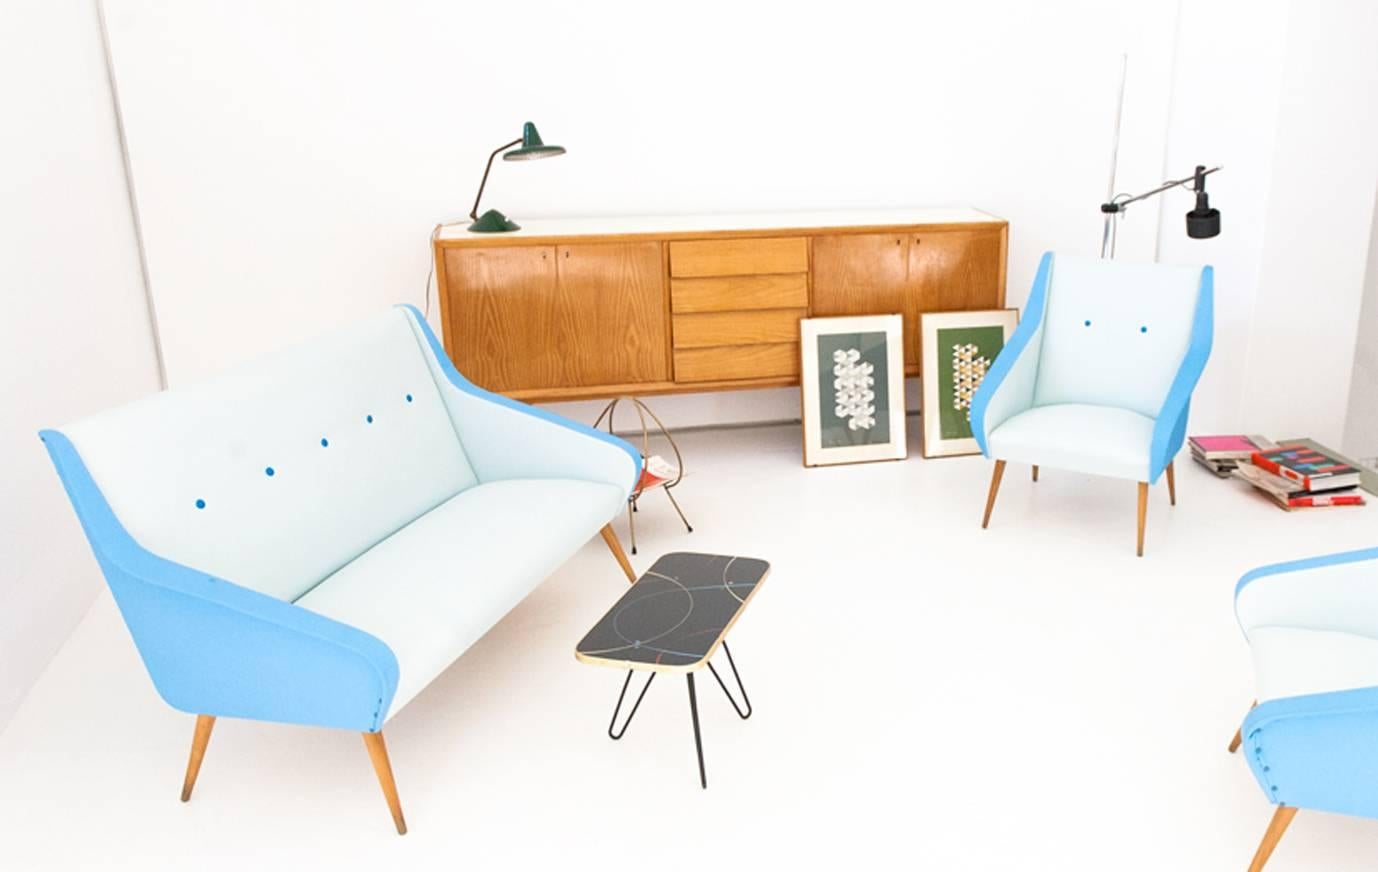 This sofa was designed and produced in Sweden during the 1950s and features a blue skai leather upholstery.